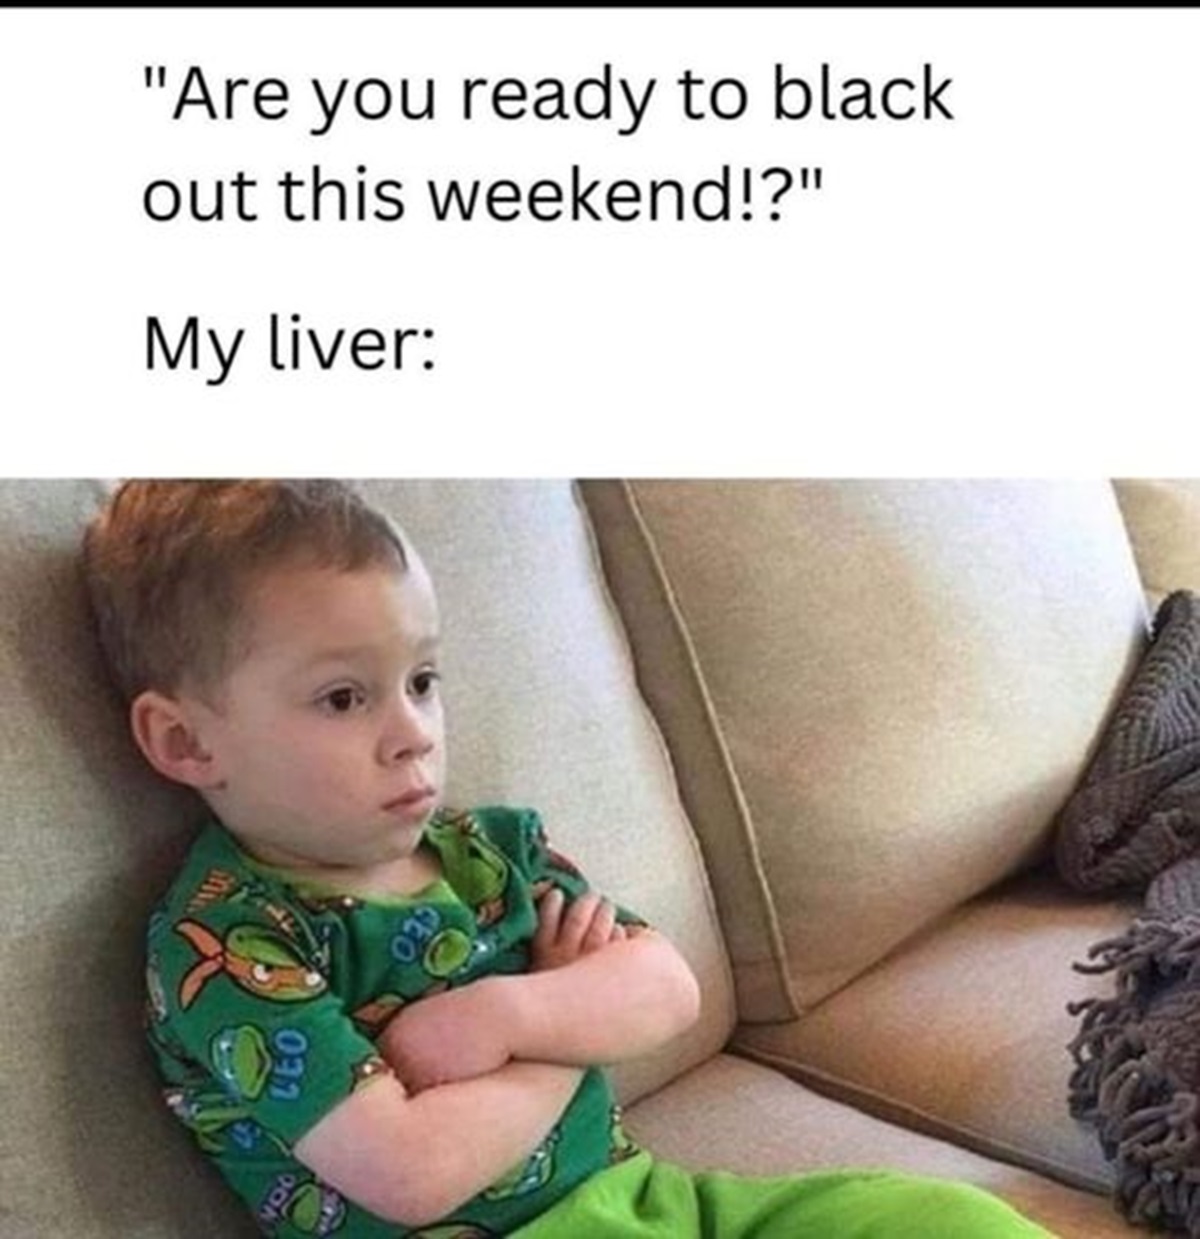 toddler - "Are you ready to black out this weekend!?" My liver